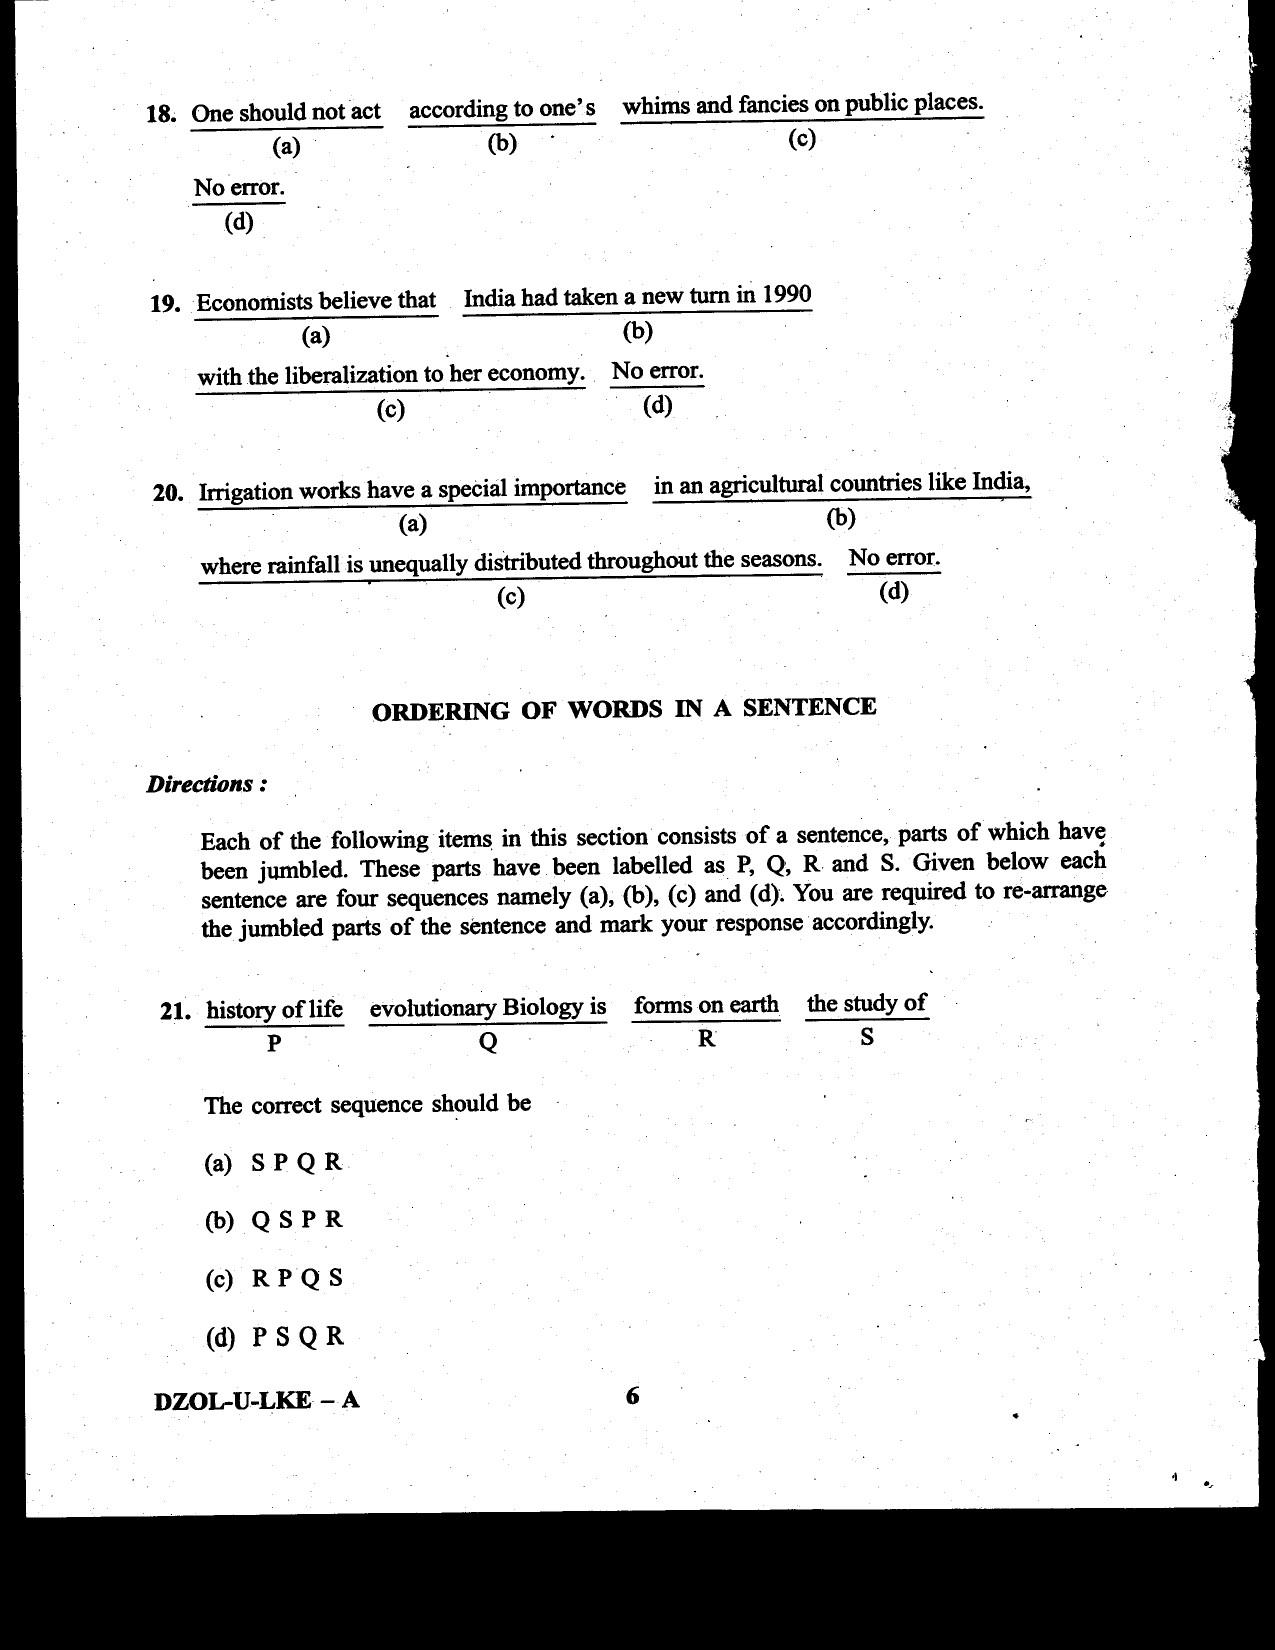 CDS II Examination 2020 English Question Paper - Image 6